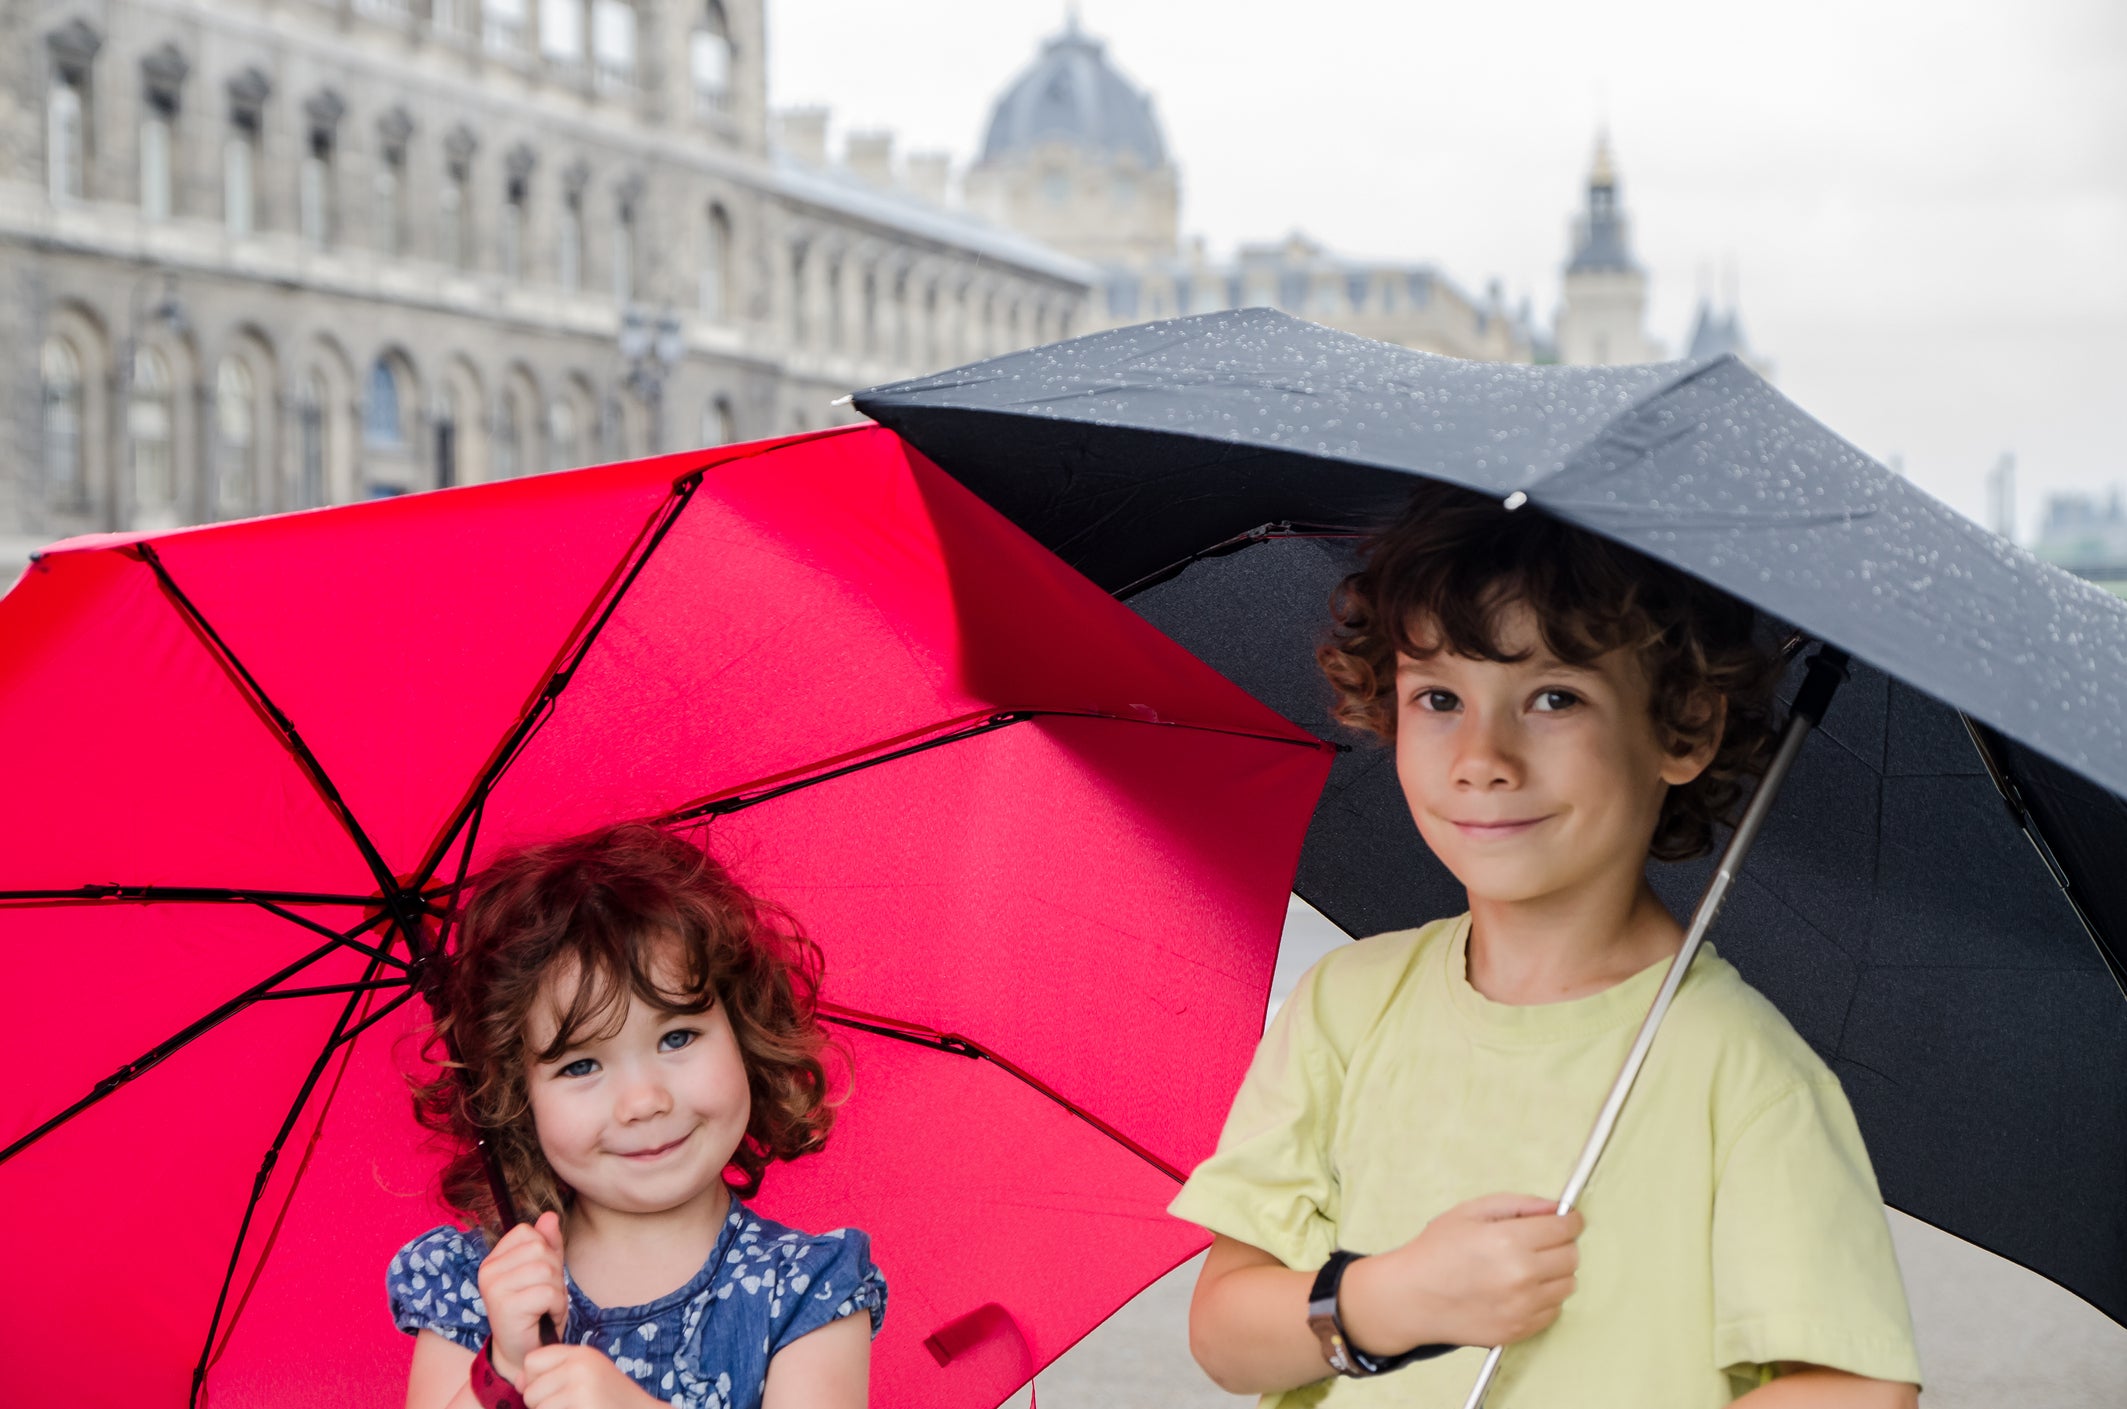 Children on a rainy day in Europe